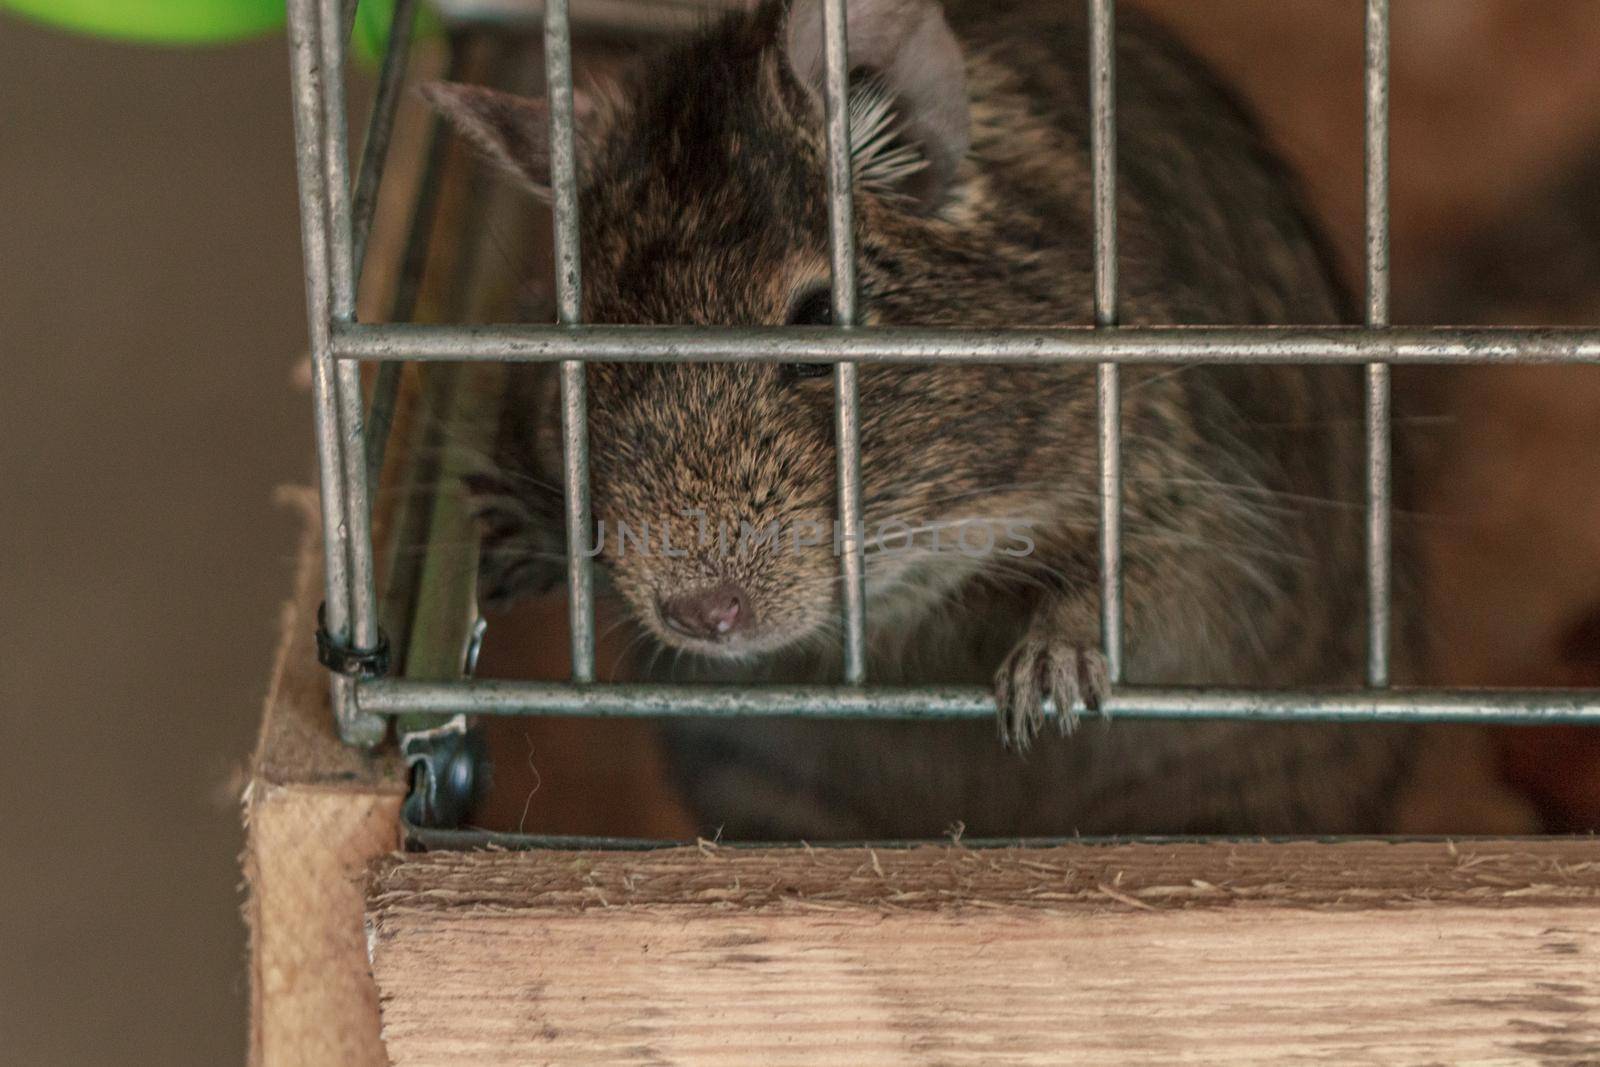 Small fluffy brown rat pet in cage drinking water